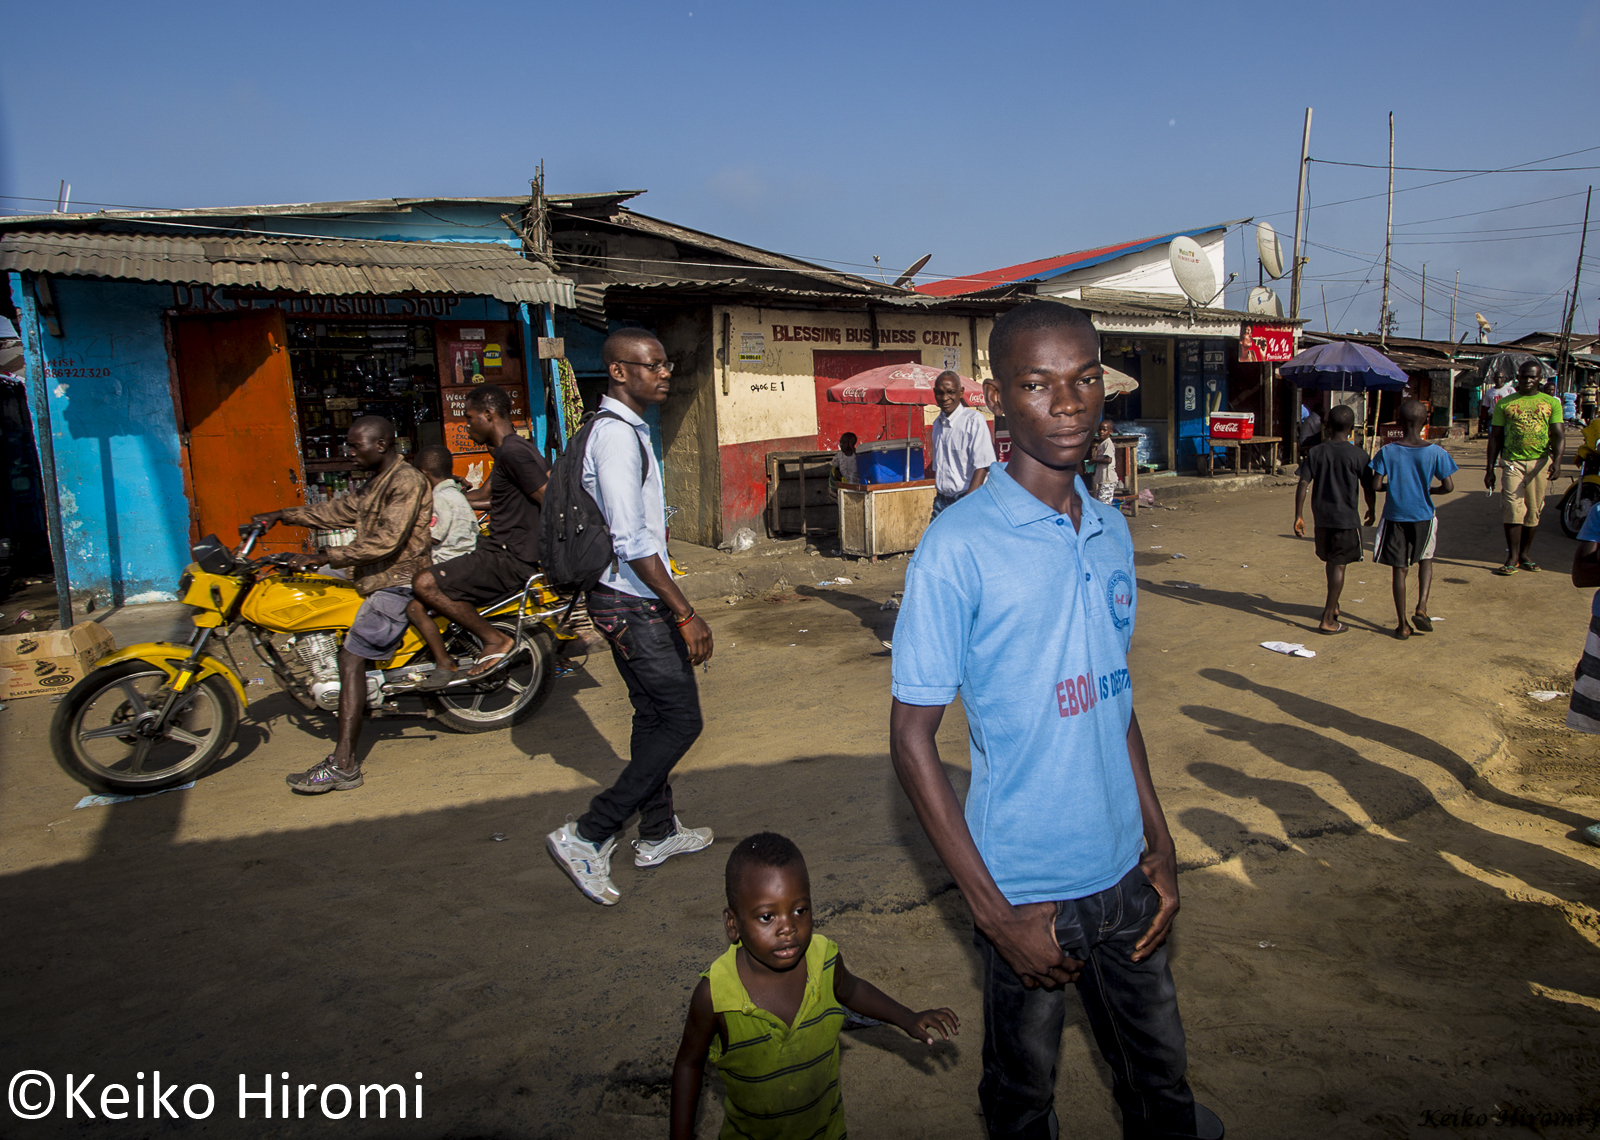  West Point youth outreach worker during Ebola crisis at West Point neighborhood of Monrovia, Liberia. 